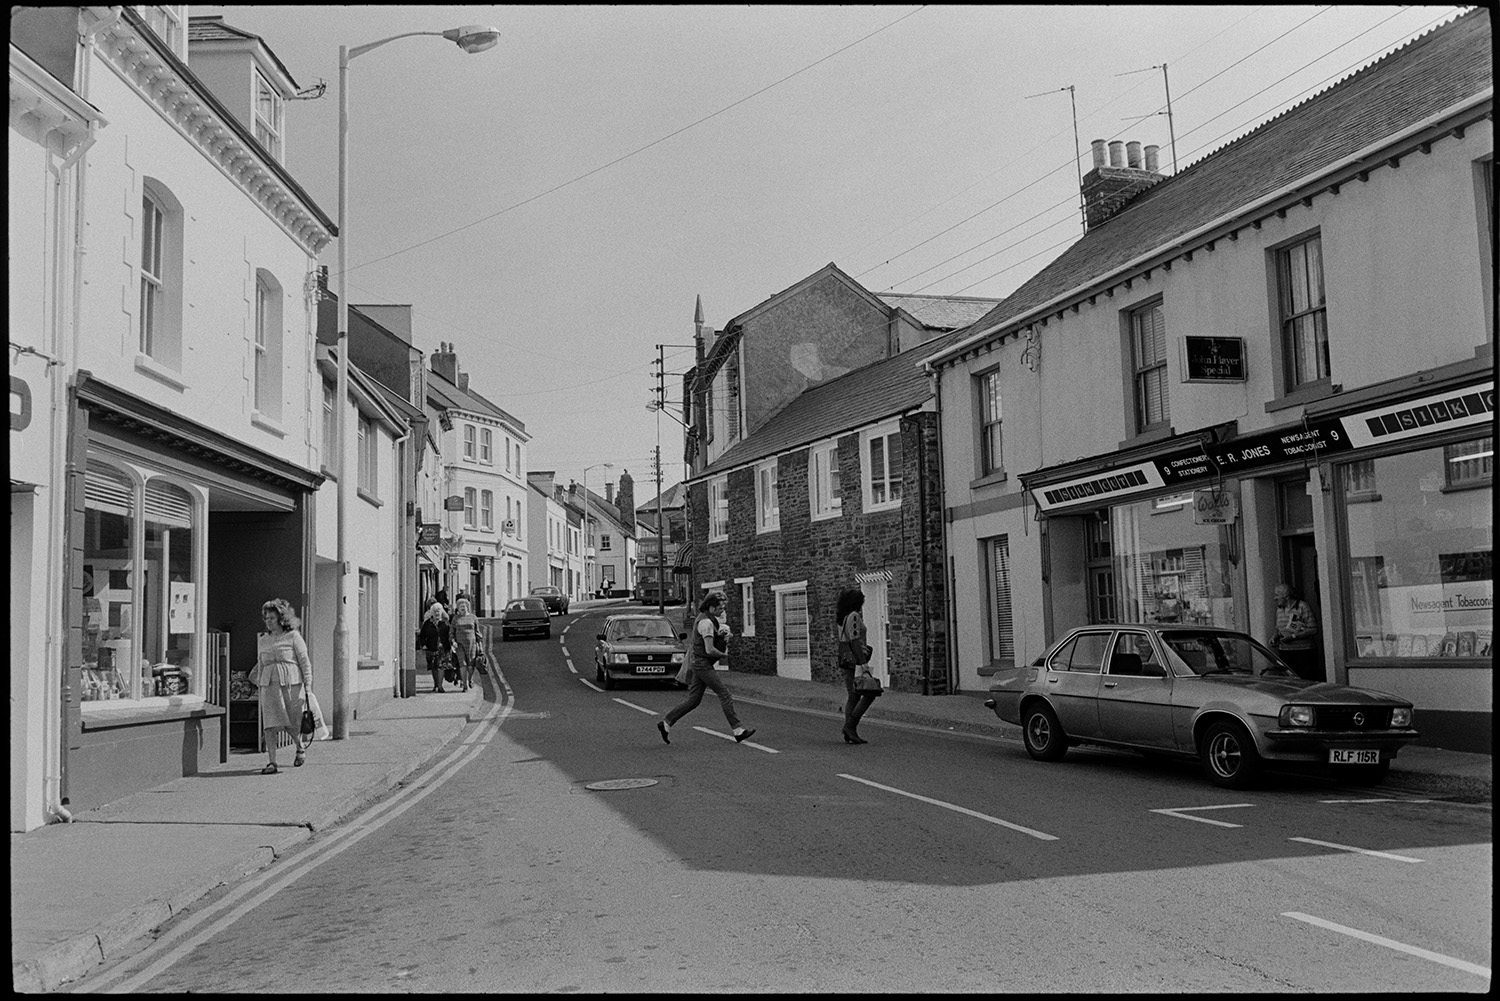 Street with bicycle and cars comparison with old photo.
[A view of a street in Northam showing pedestrians, cars and shops, including  E. R. Jones newsagents.]